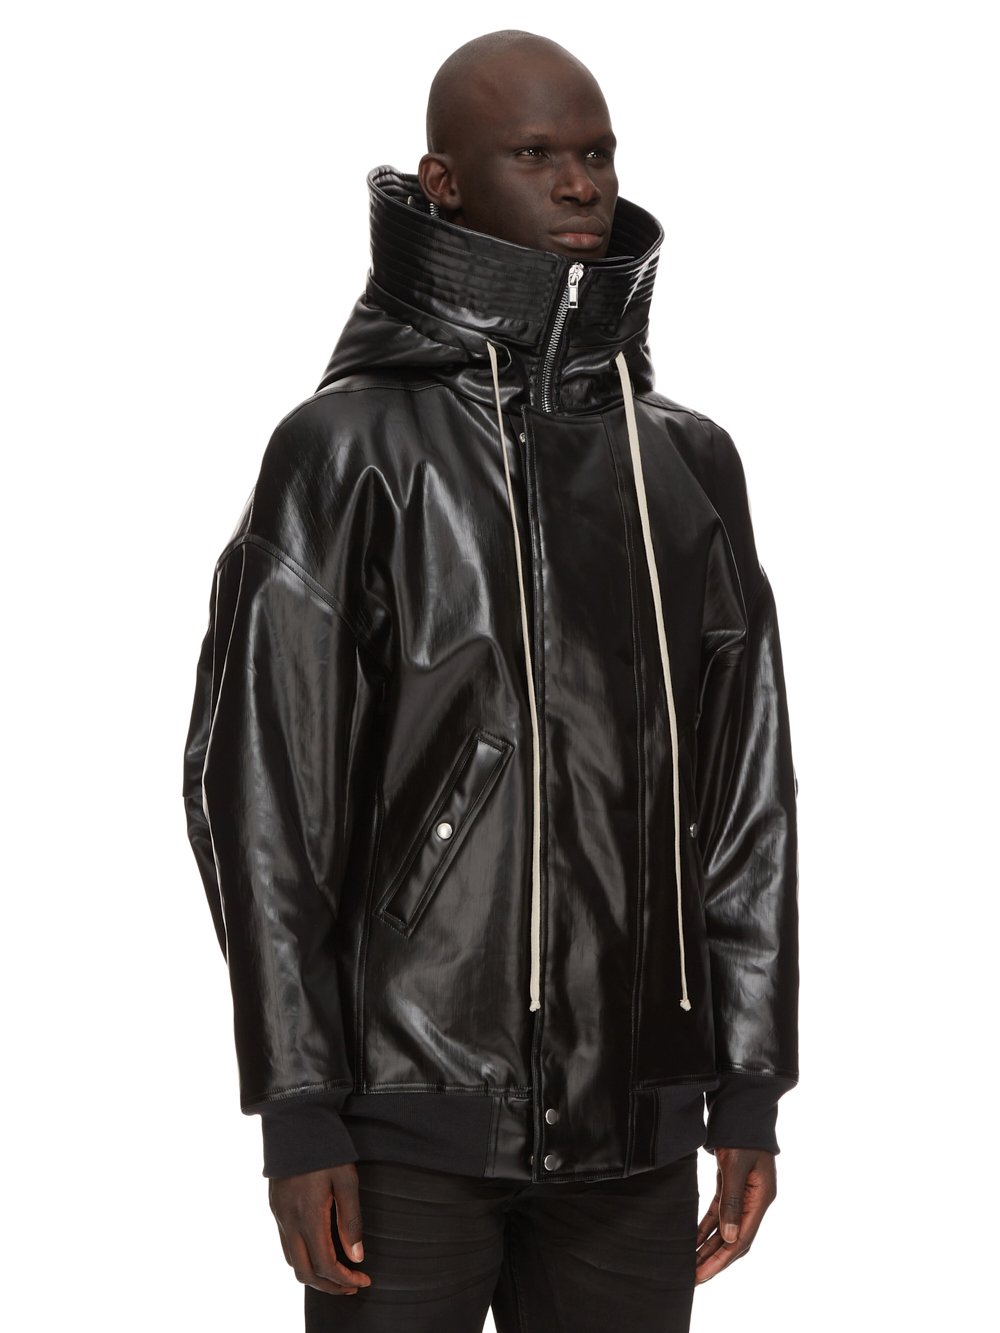 DRKSHDW FW23 LUXOR HOODED BOMBER IN BLACK AND MAUVE RUBBER COVERED STRETCH DENIM